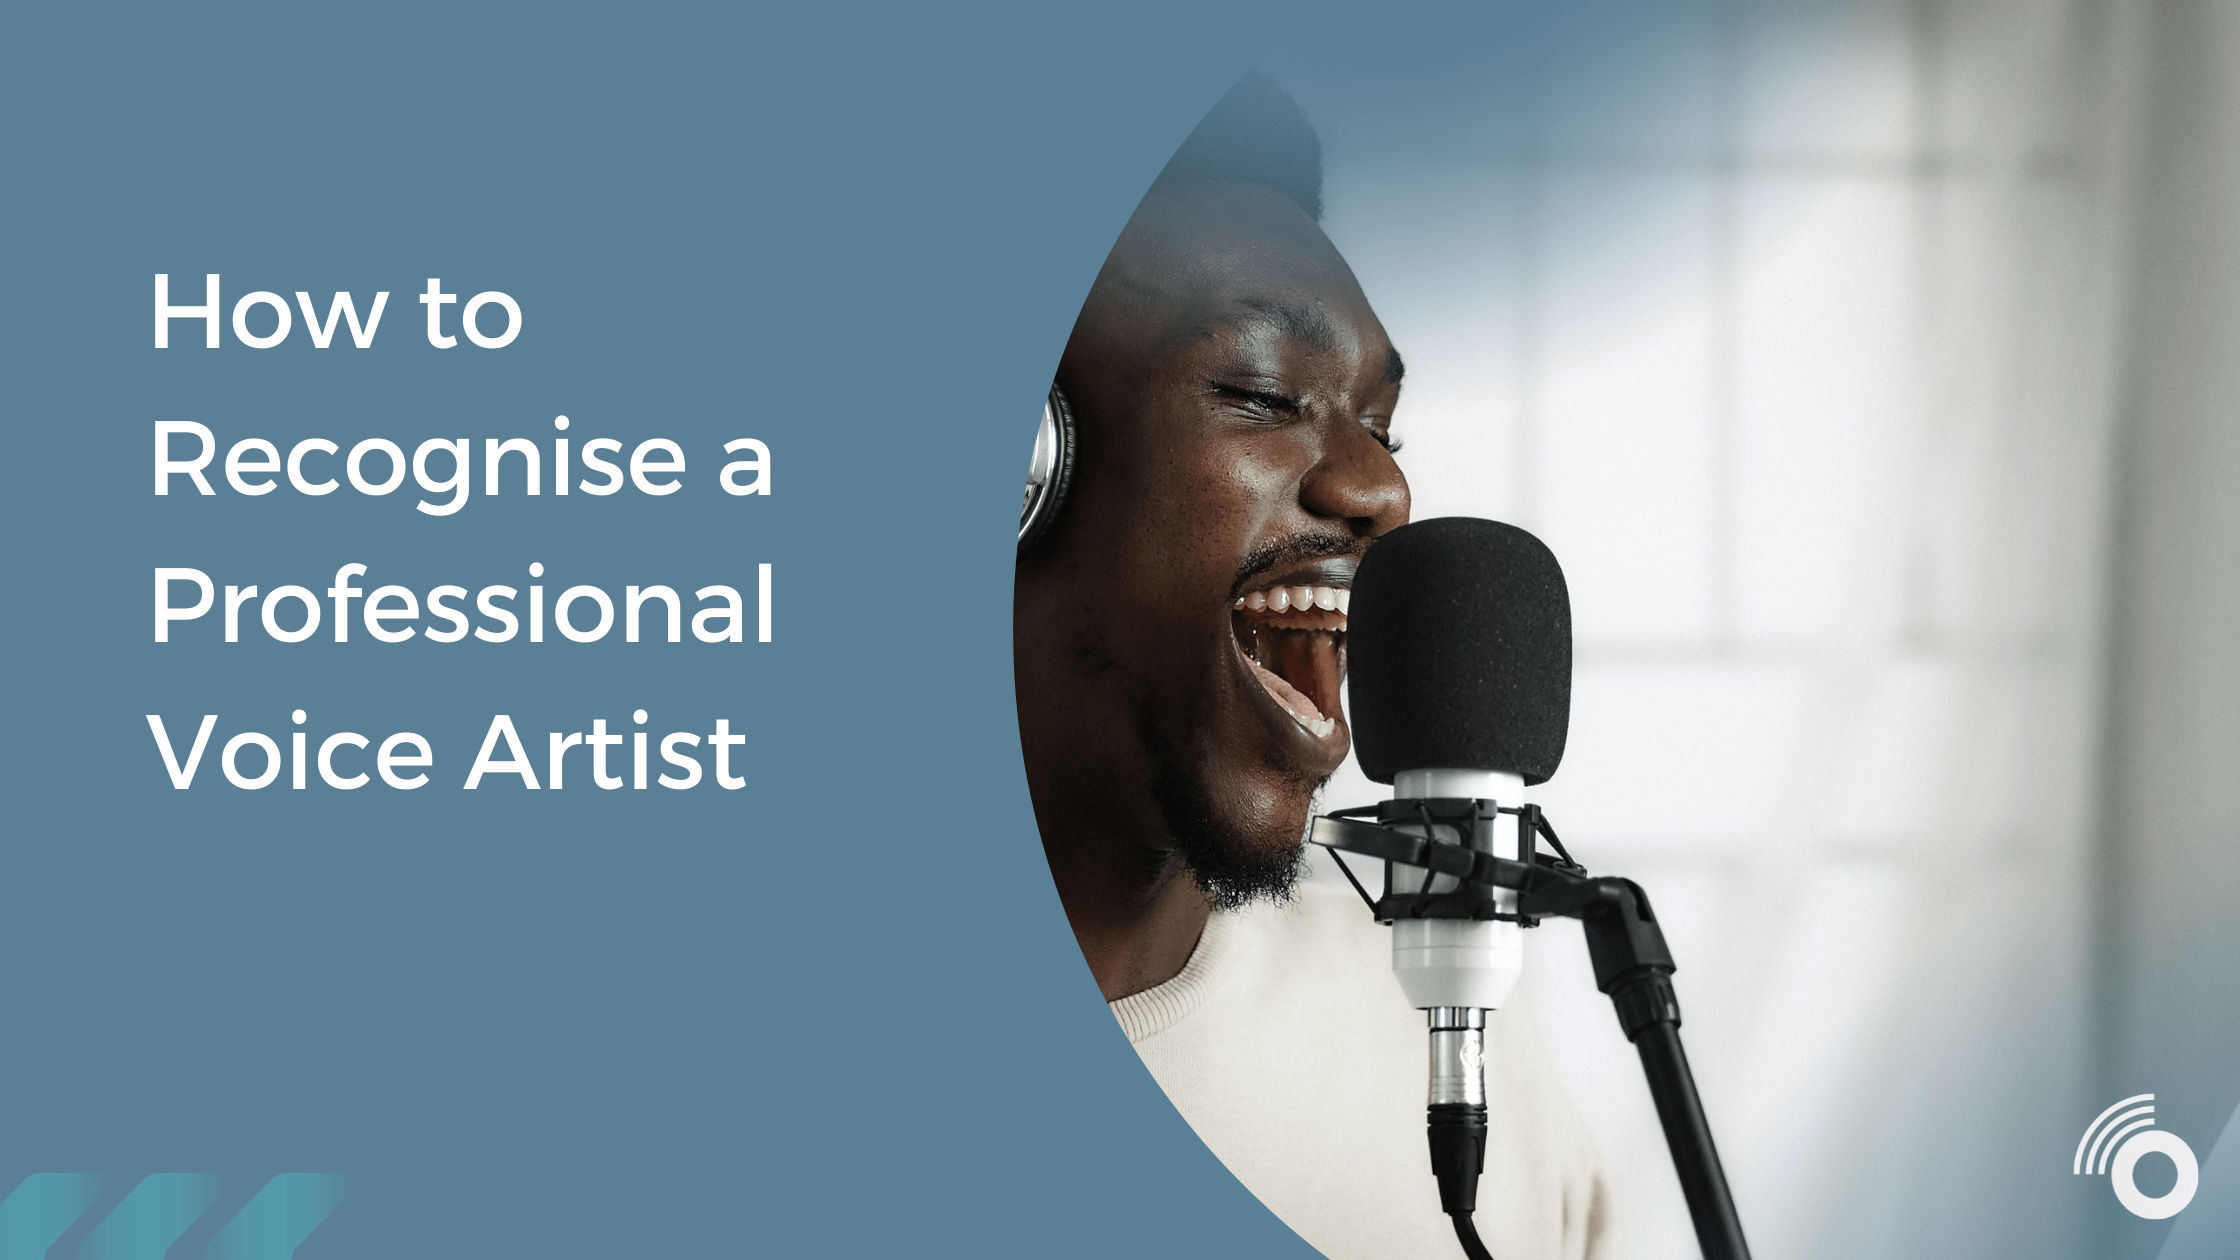 How to Recognise a Professional Voice Artist